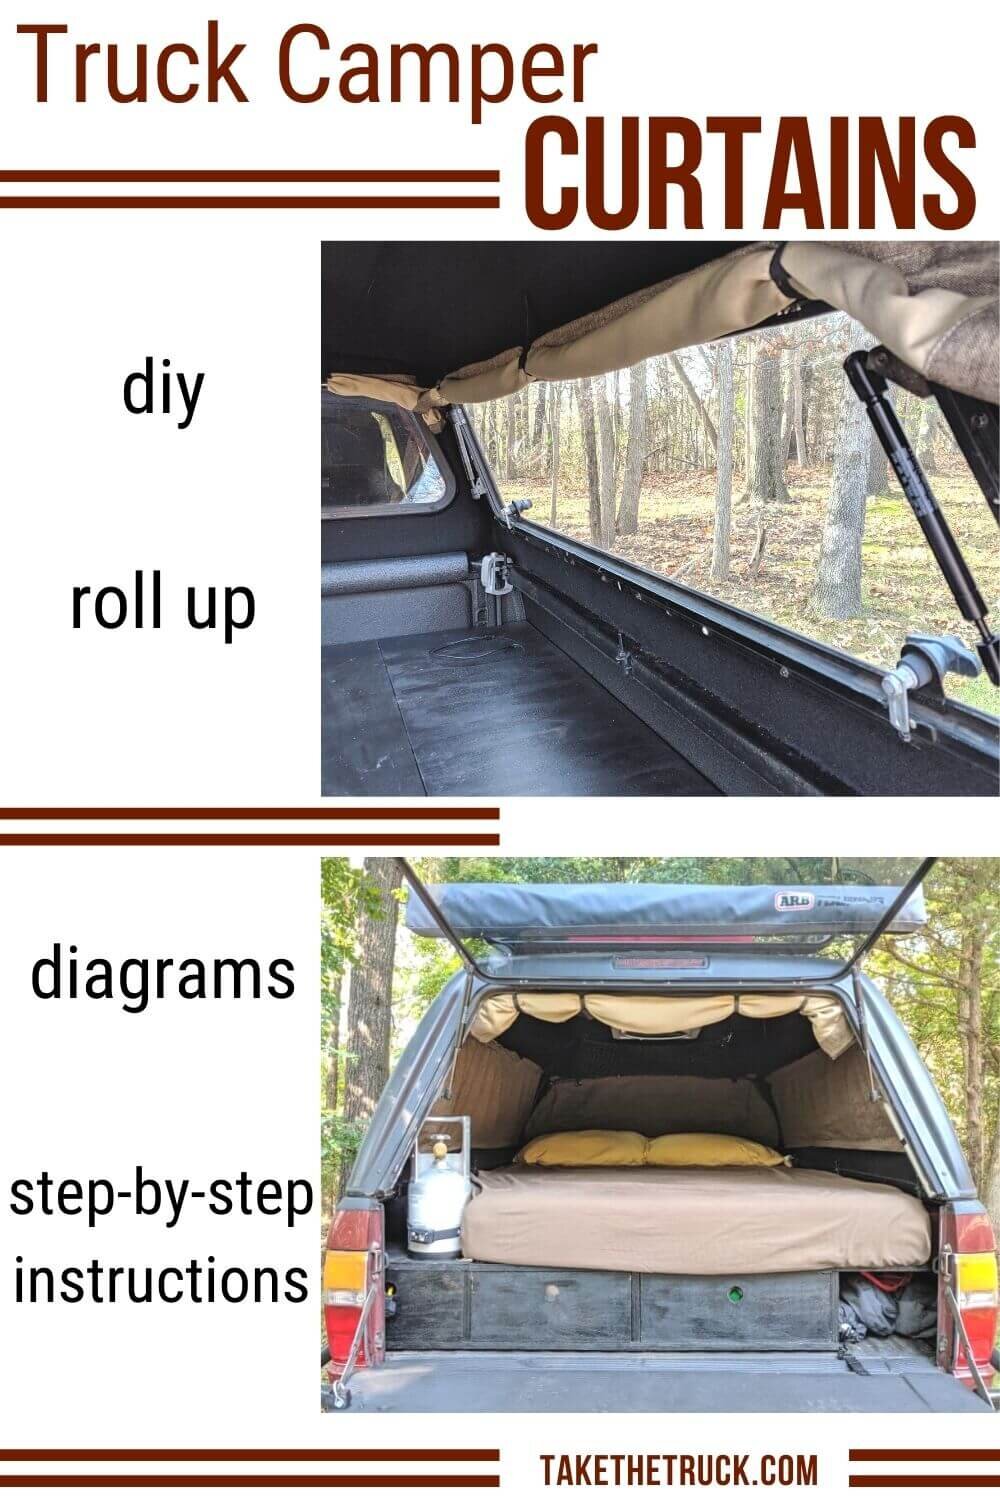 Guide for making DIY camper shell curtains.